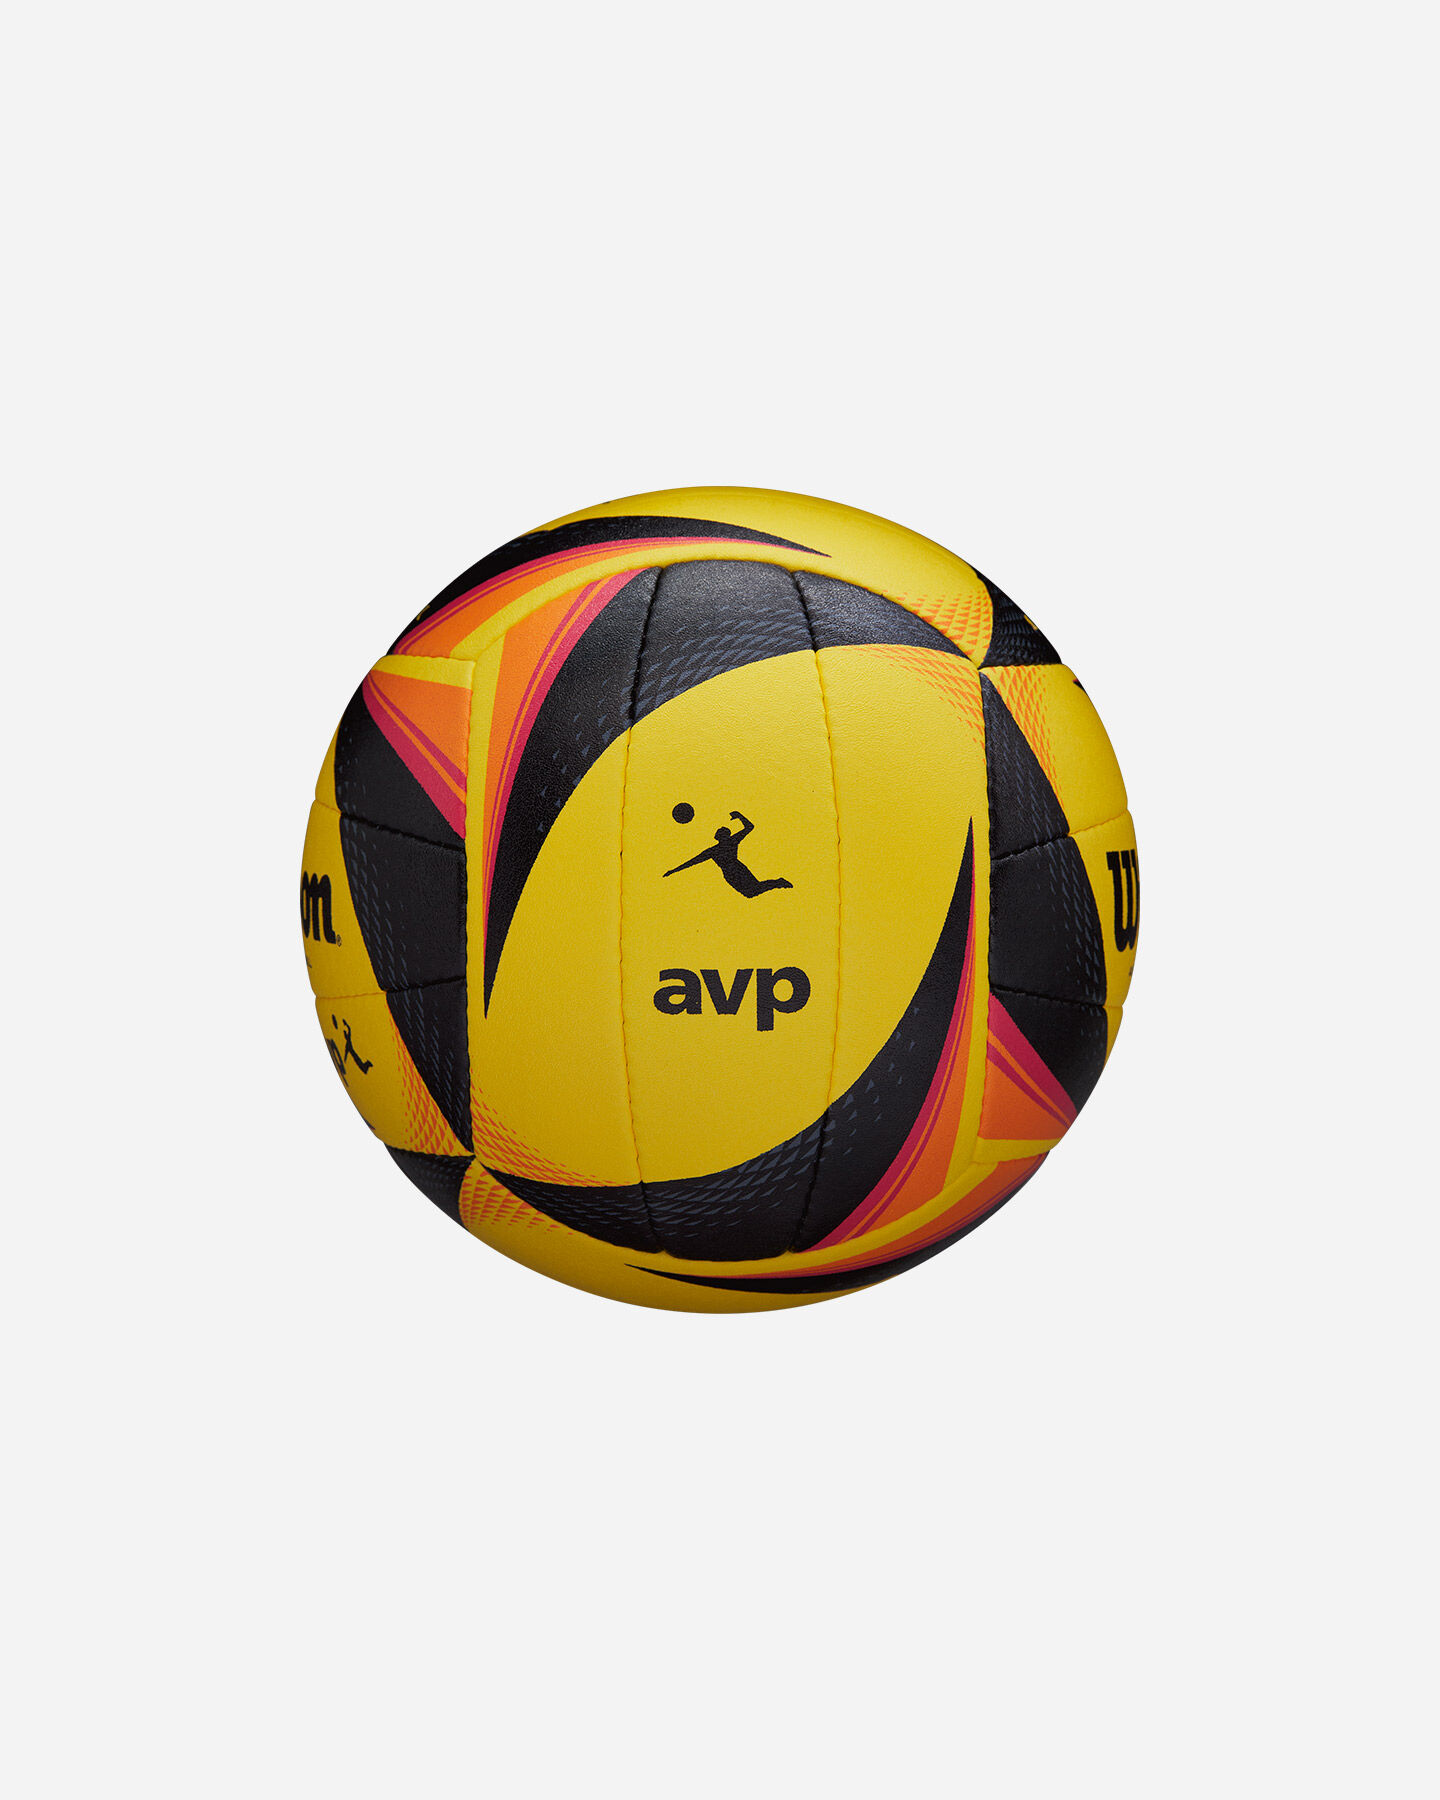  Pallone volley WILSON BEACH OPTX AVP OFFICIAL GB  S5440245|UNI|OFFICIAL scatto 1